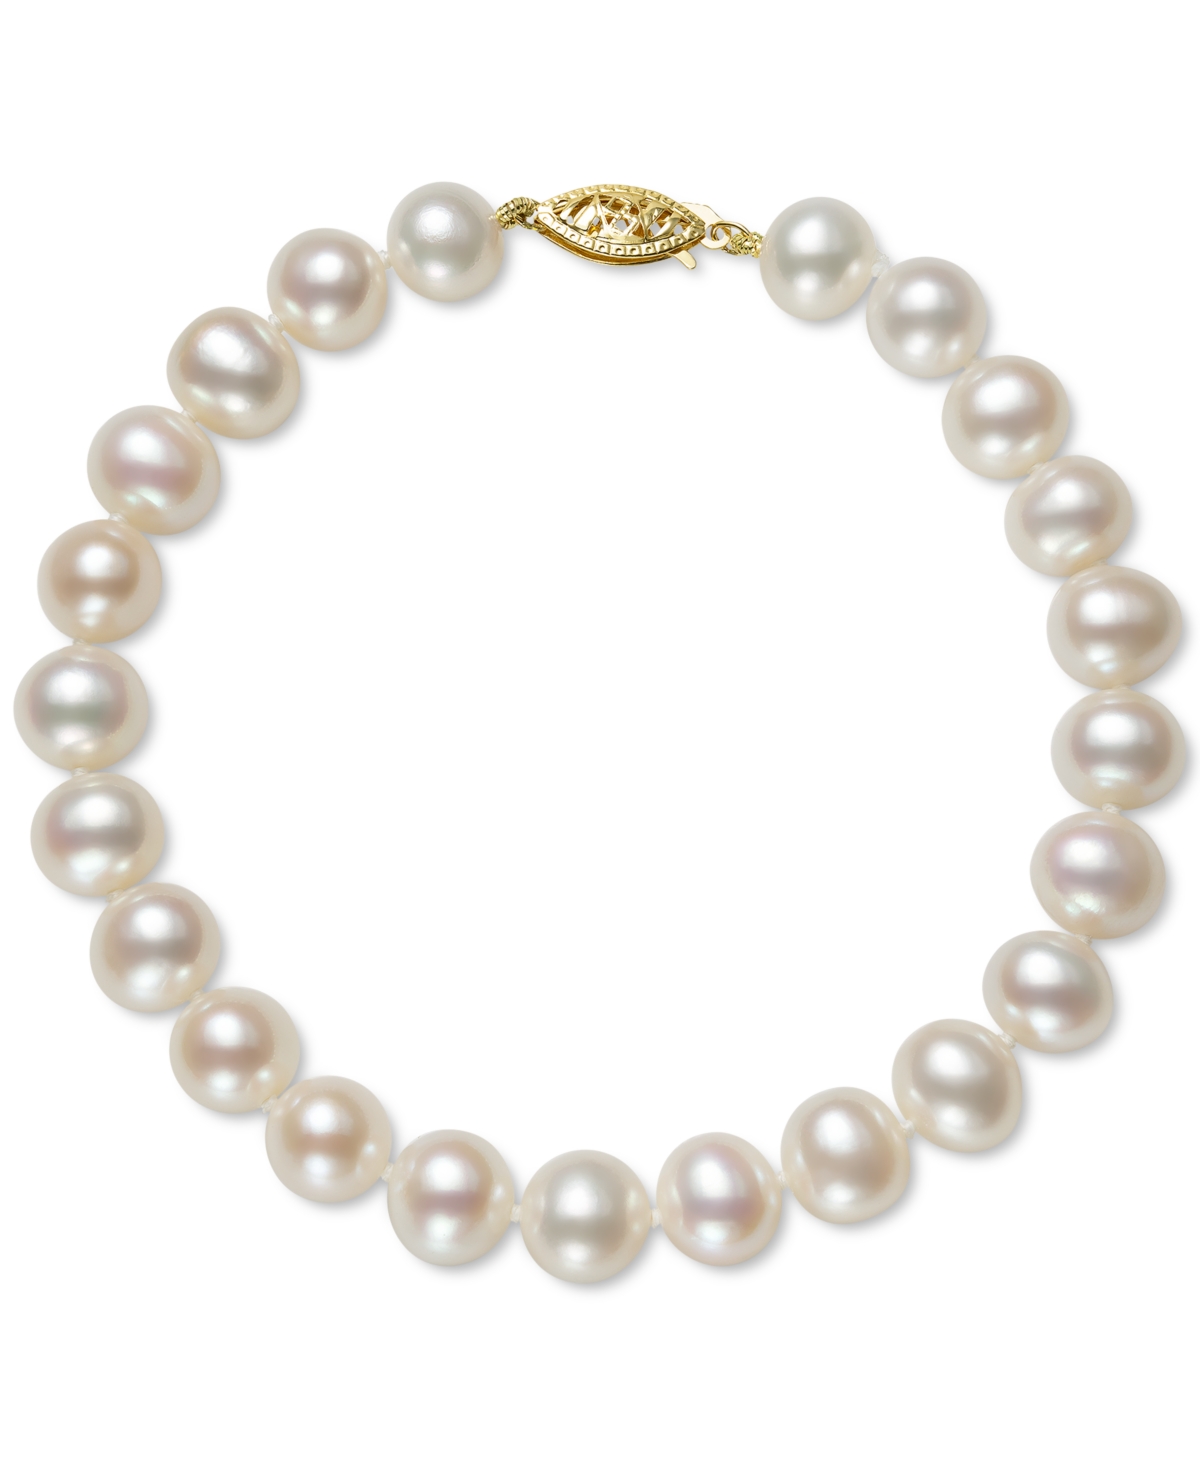 Cultured Freshwater Pearl Bracelet (7-1/2mm) in 14k Gold - Yellow Gold